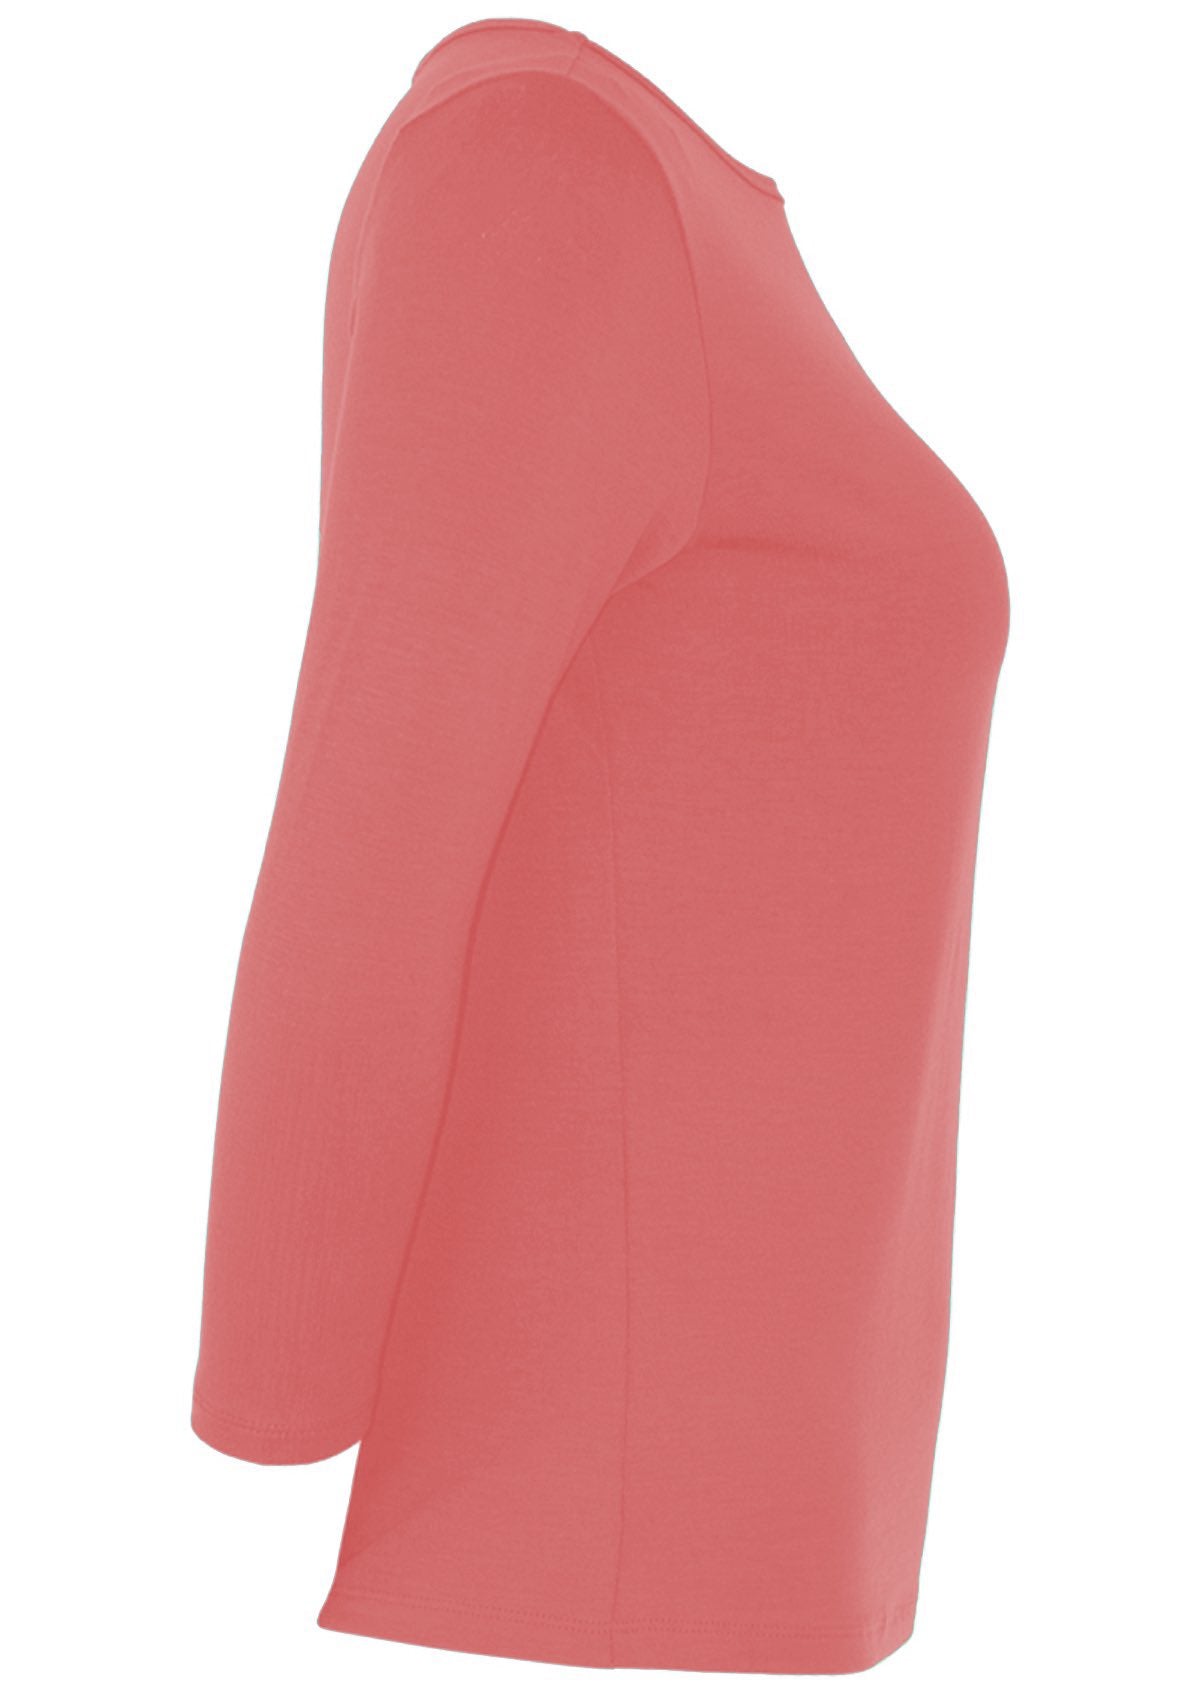 Side view of women's rayon boat neck pink 3/4 sleeve top.